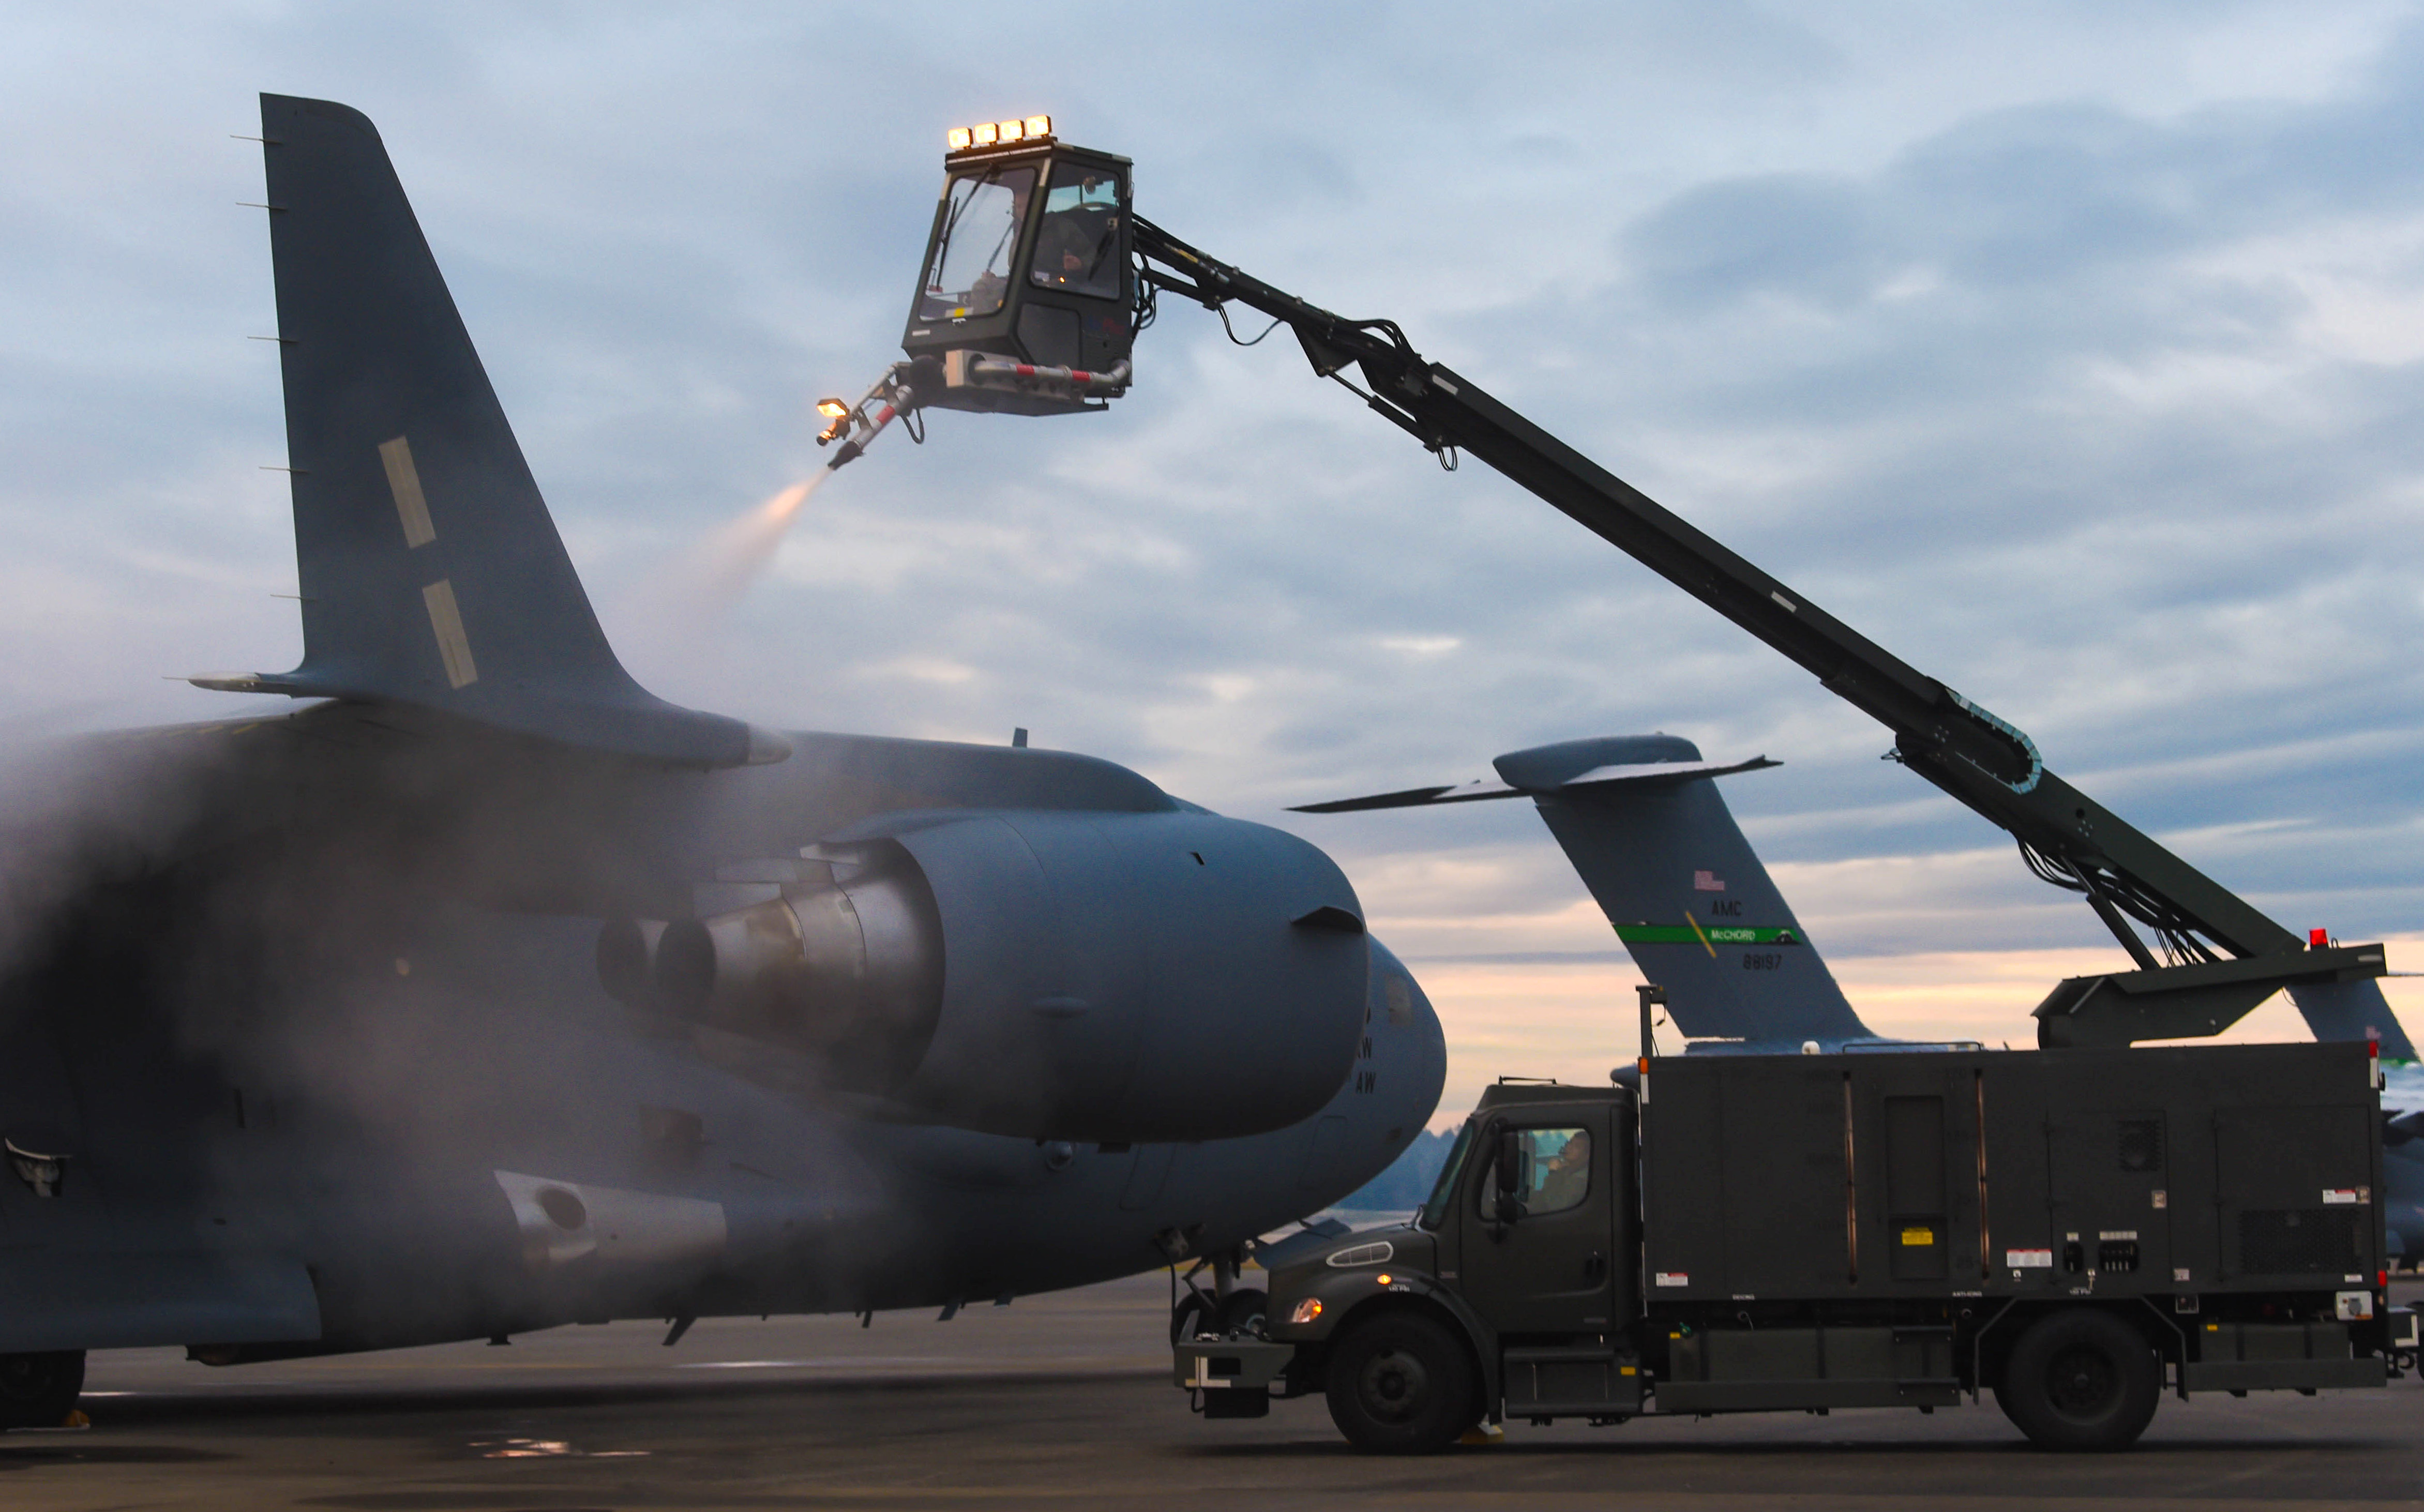 Airmen battle ice, snow to ensure readiness > Air Force > Display